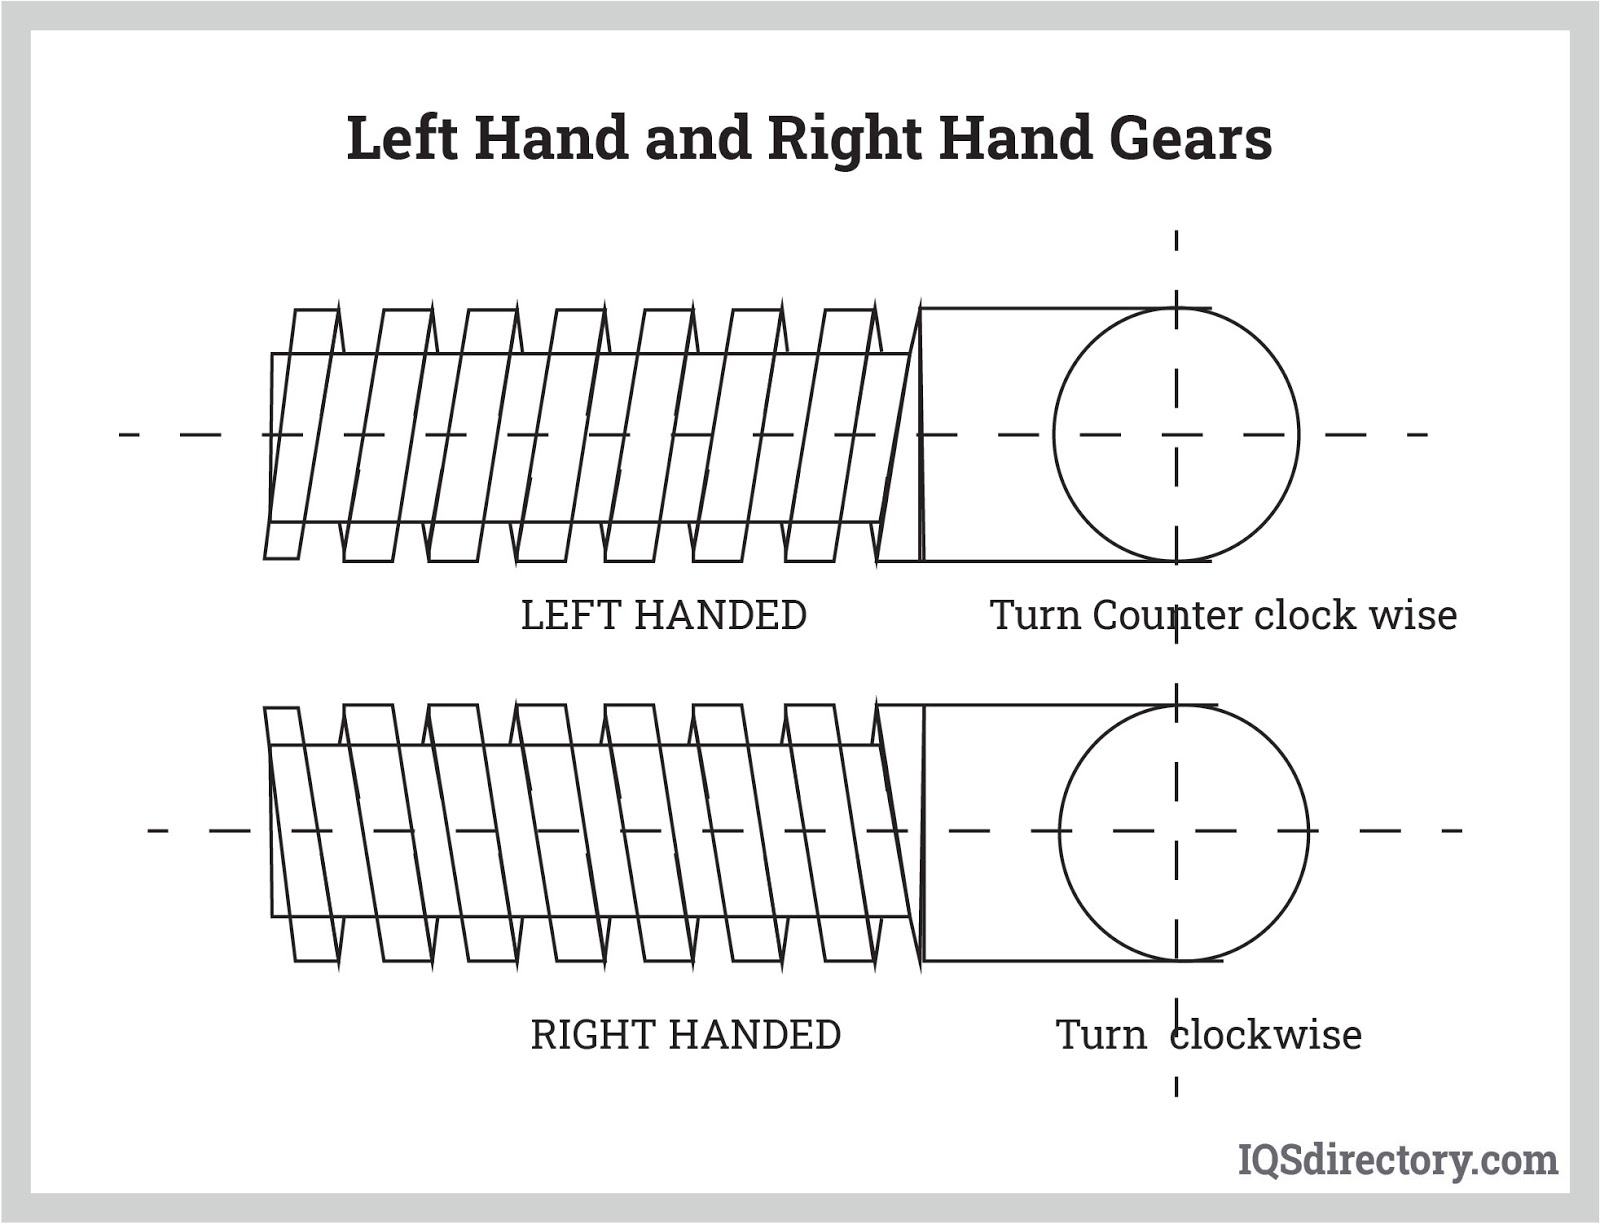 Left Hand and Right Hand Gears